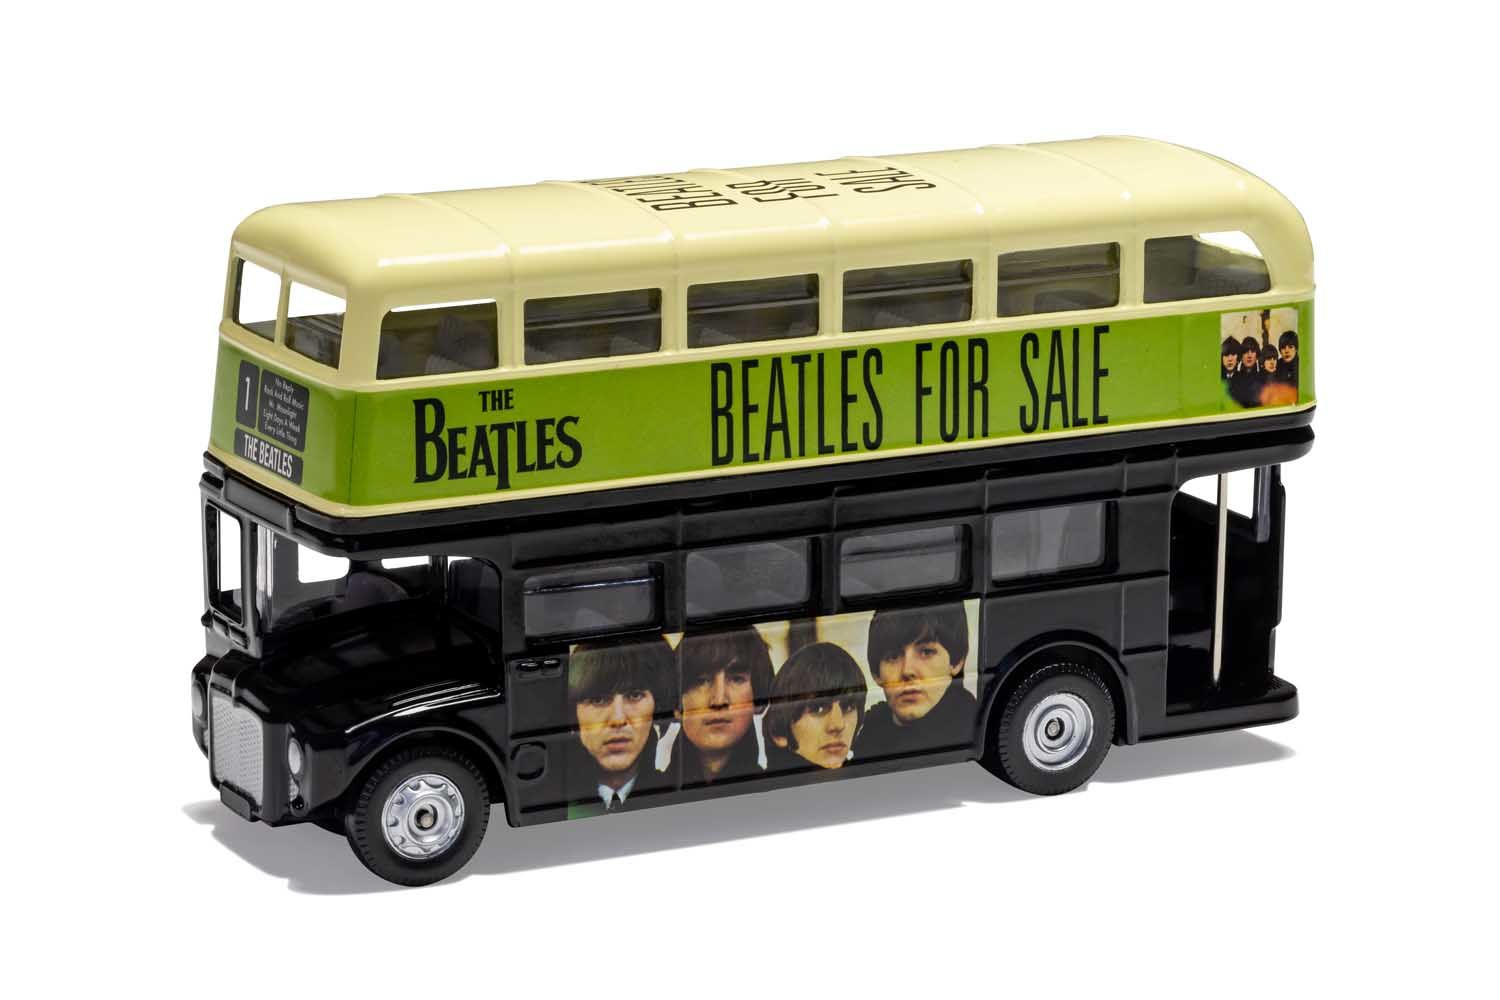 The Beatles - The Beatles  London Bus - Beatles For Sale